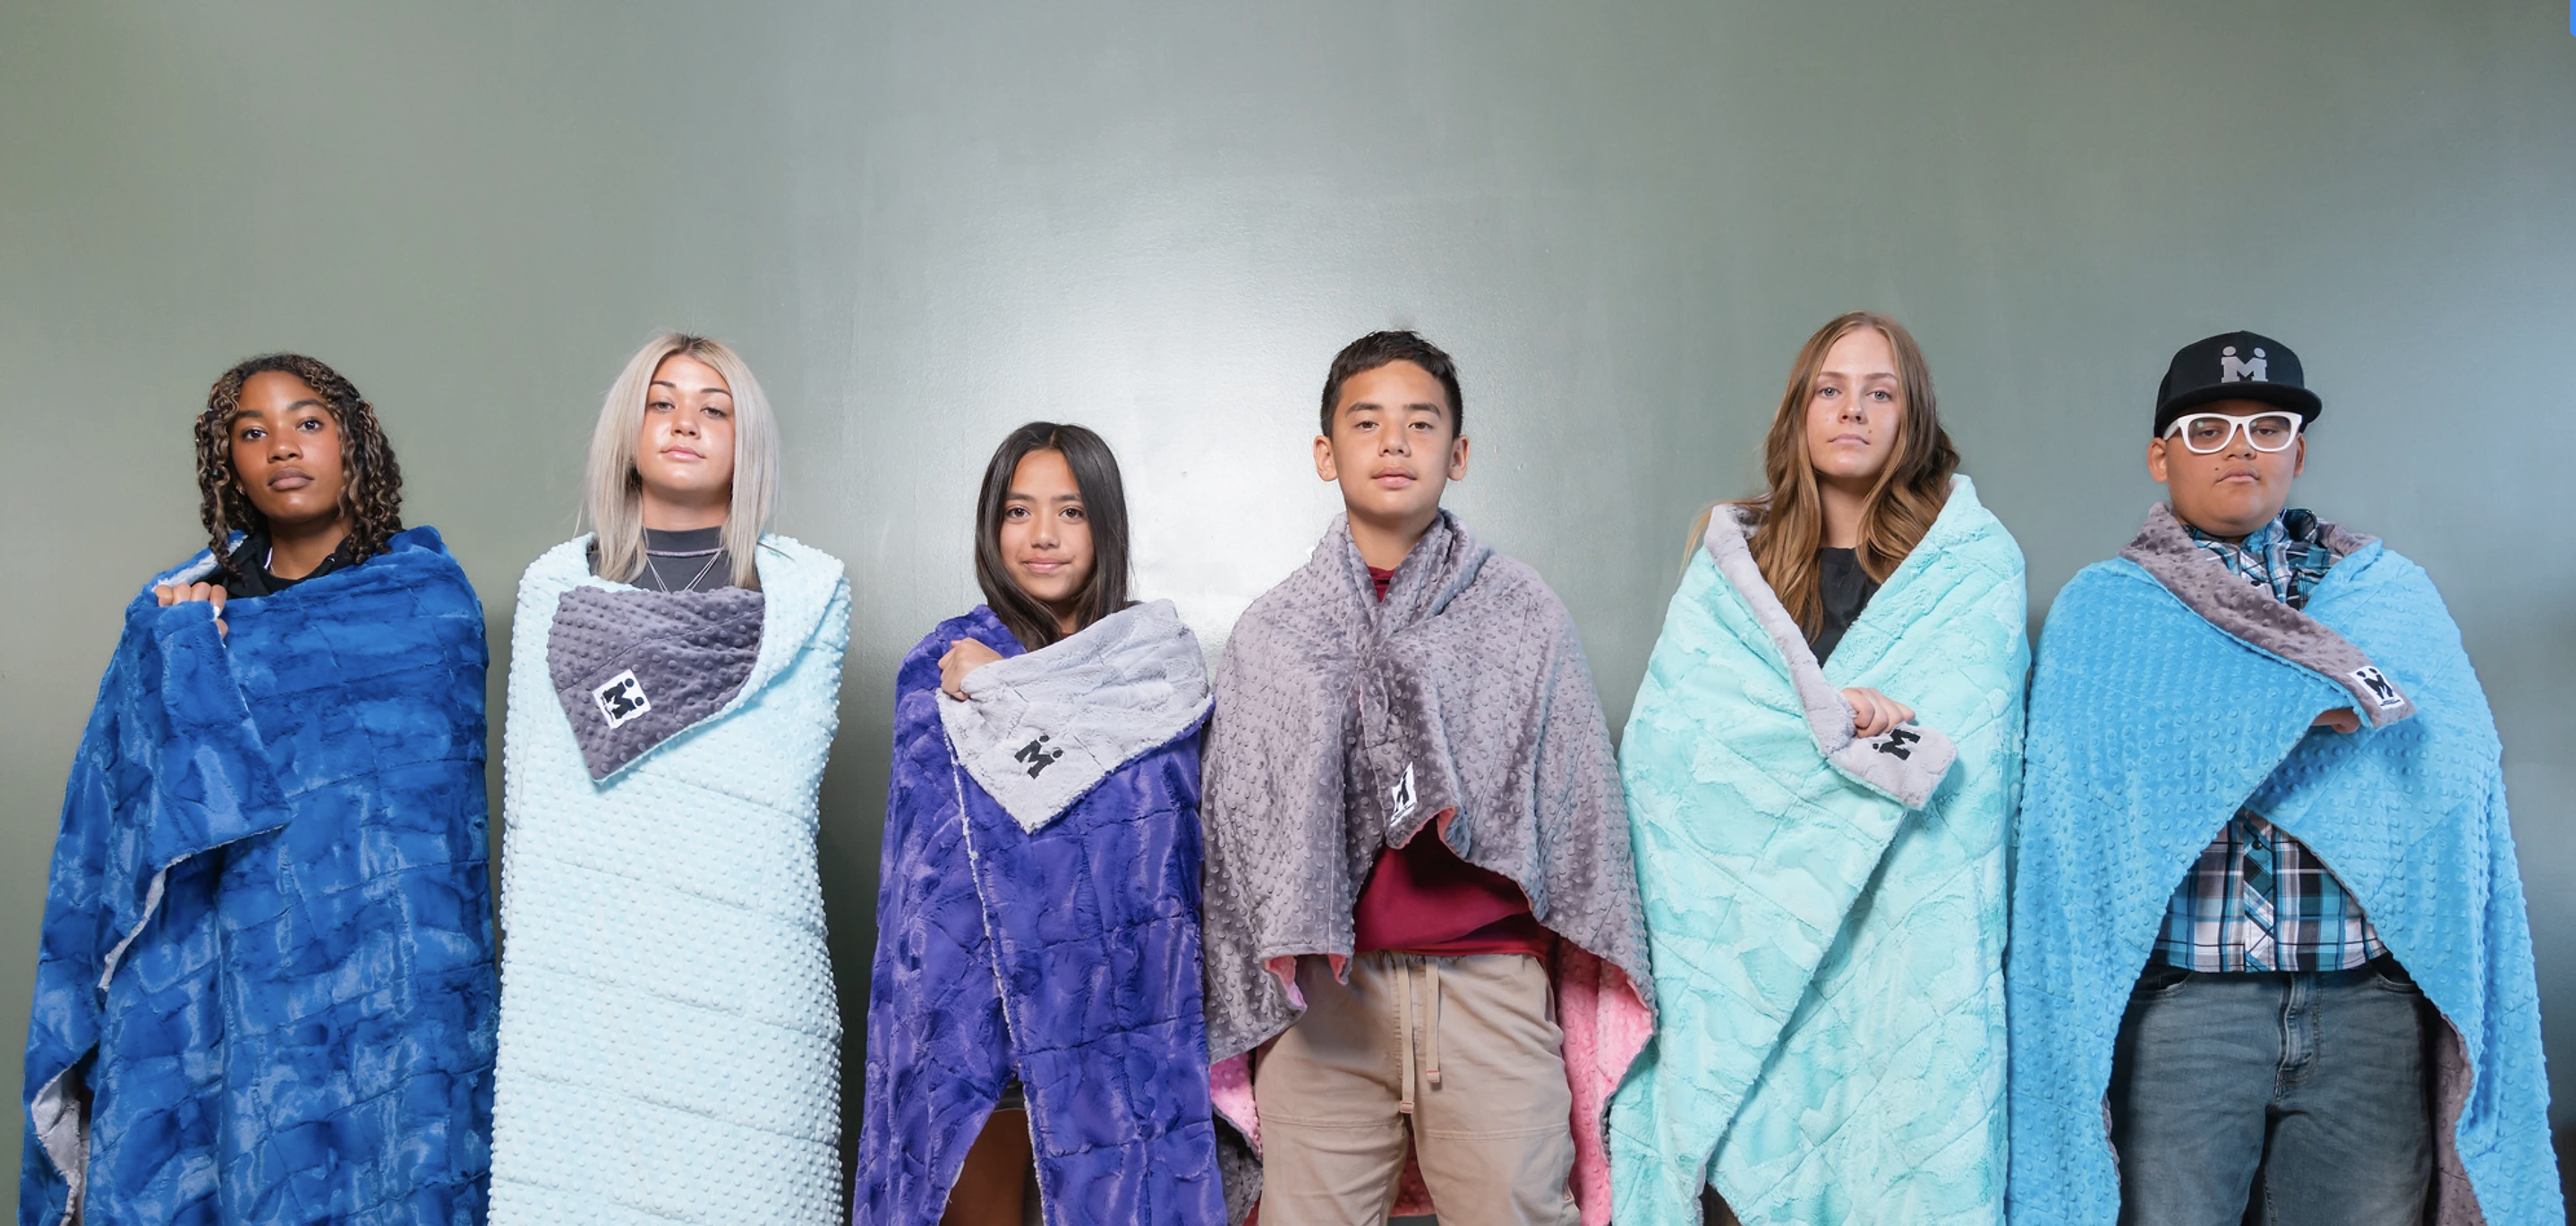 How Jami Furniss founded The Moxie Agency and Moxie Weighted Blankets